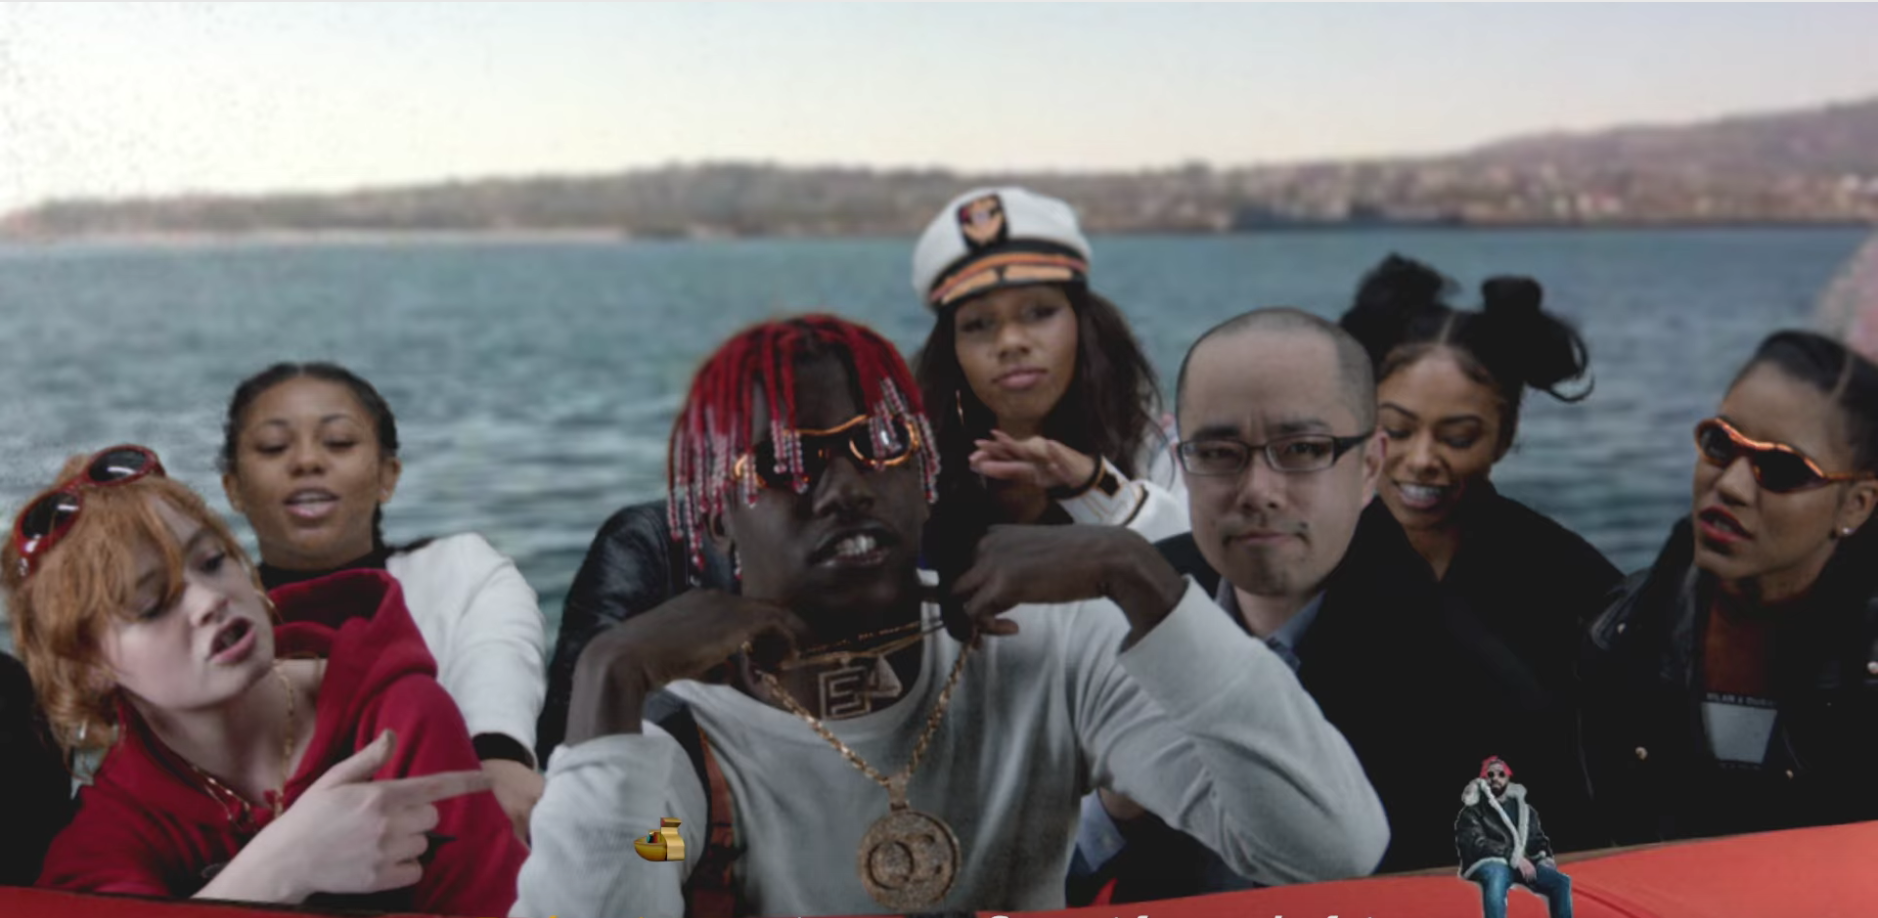 listen to lil yachty one night